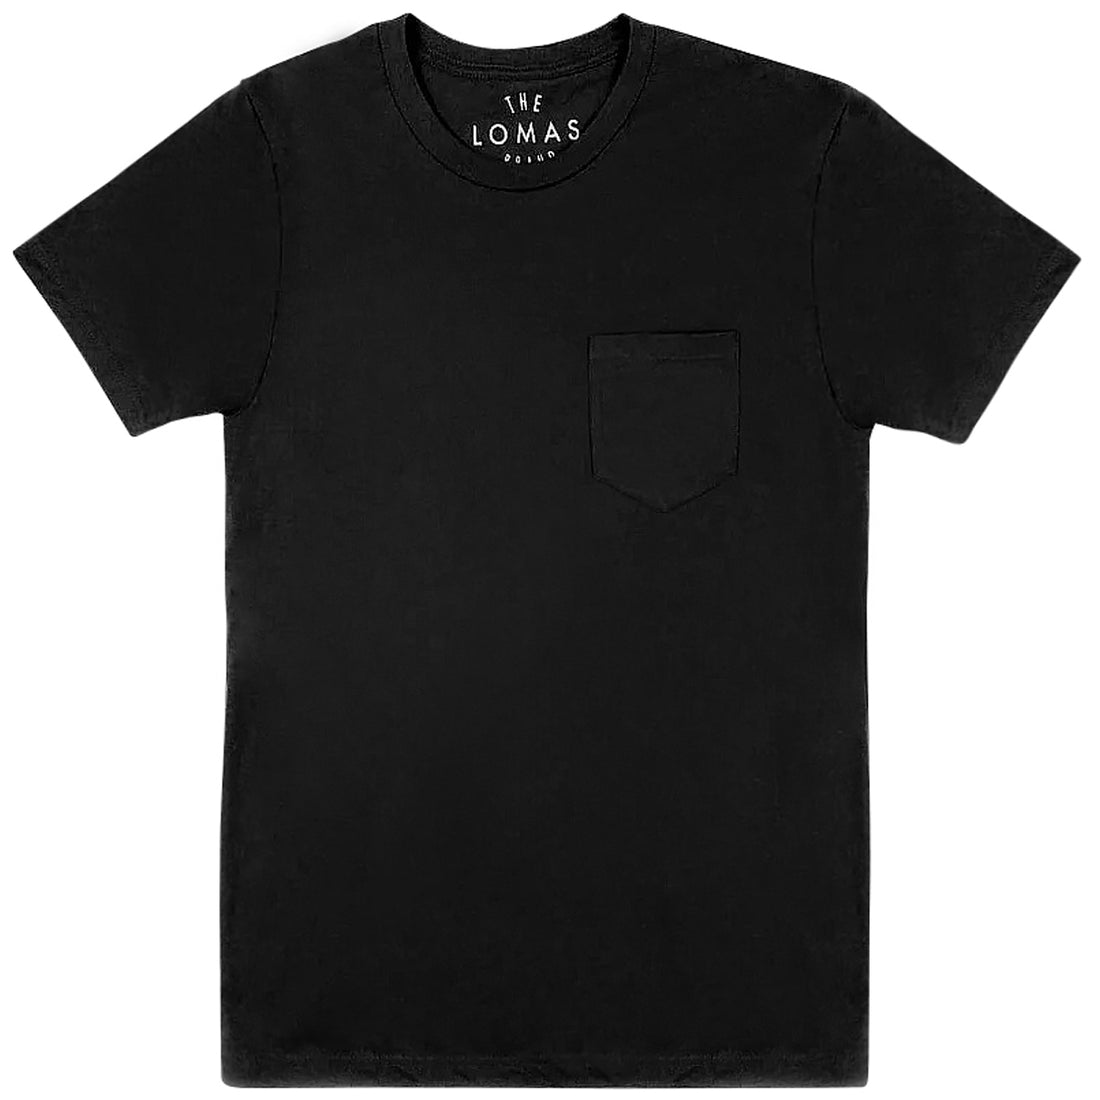 Flat shot of a blank black pocket tee. "THE LOMAS BRAND" is printed as a tag on the inside back collar, in white.